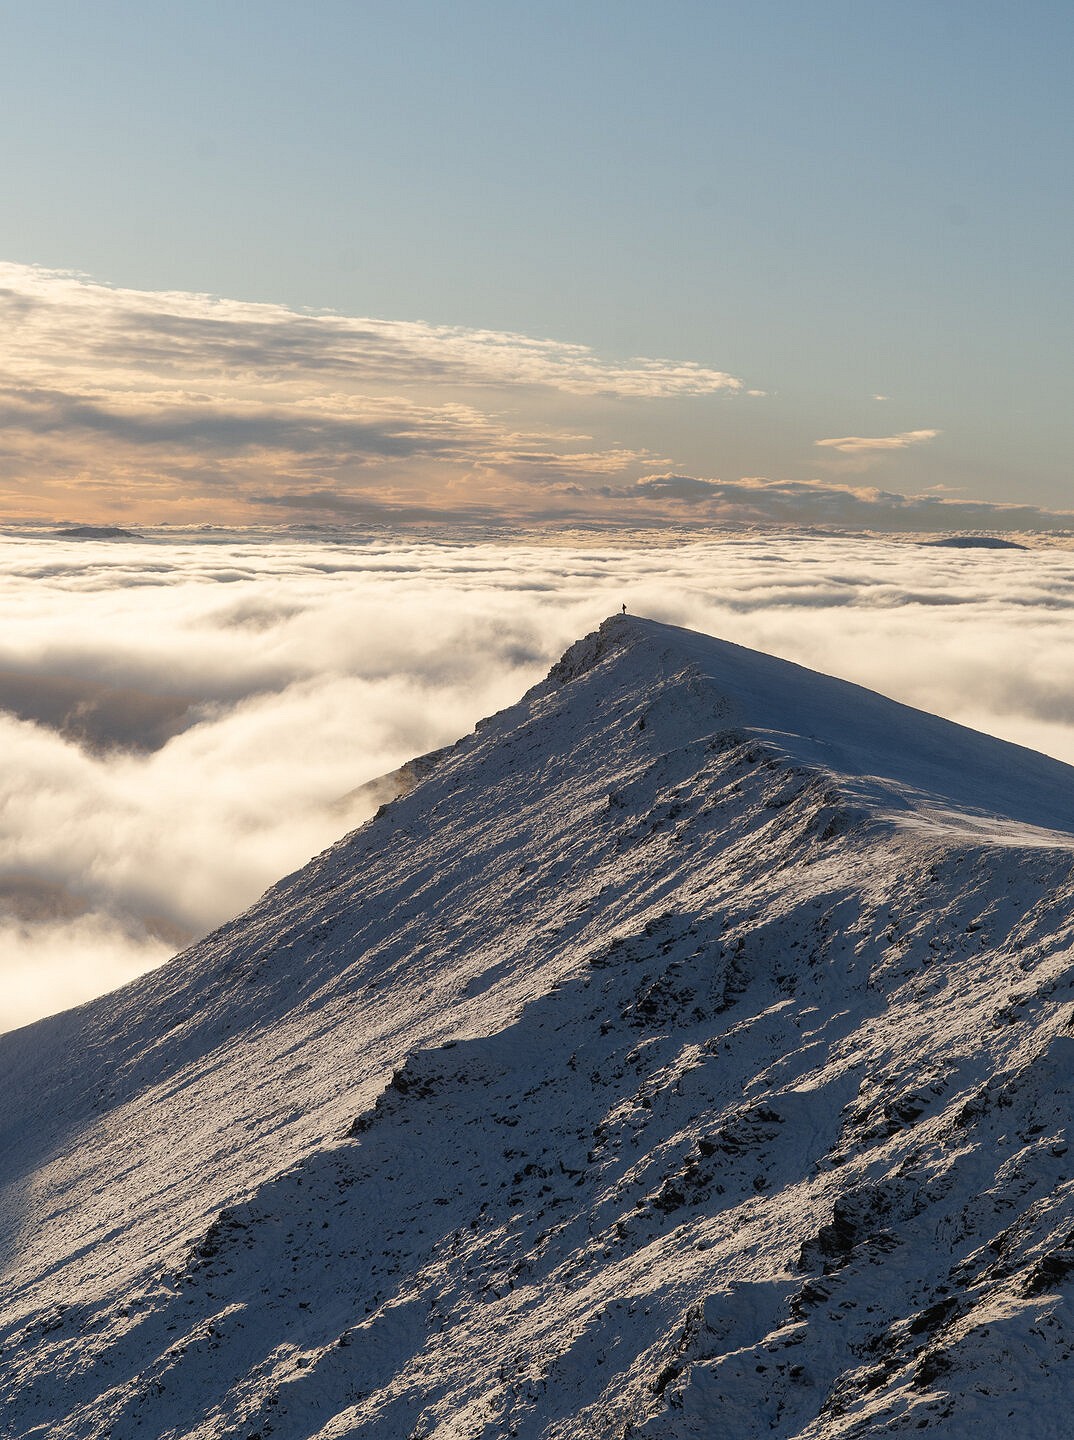 Taken from the summit of Blencathra, after a snowy scramble up Sharp Edge.  © Ruby Chapman